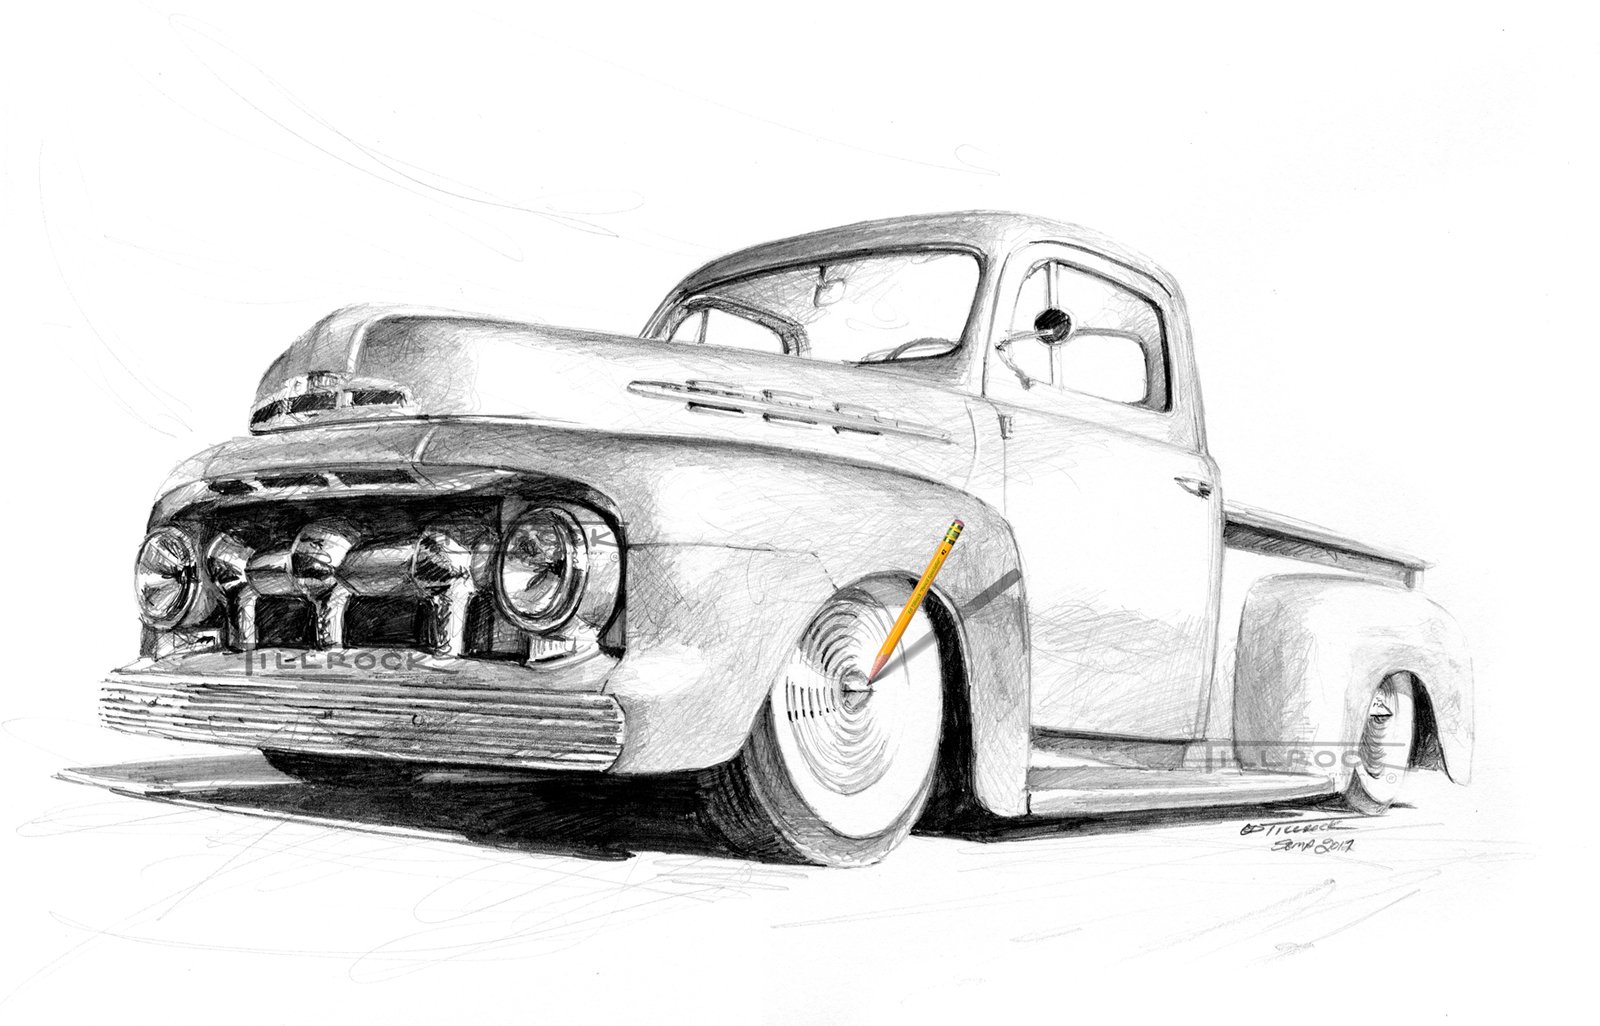 1954 FORD F-100 PICKUP - How To Draw American Classic Truck Easy Simple  Step By Step - YouTube